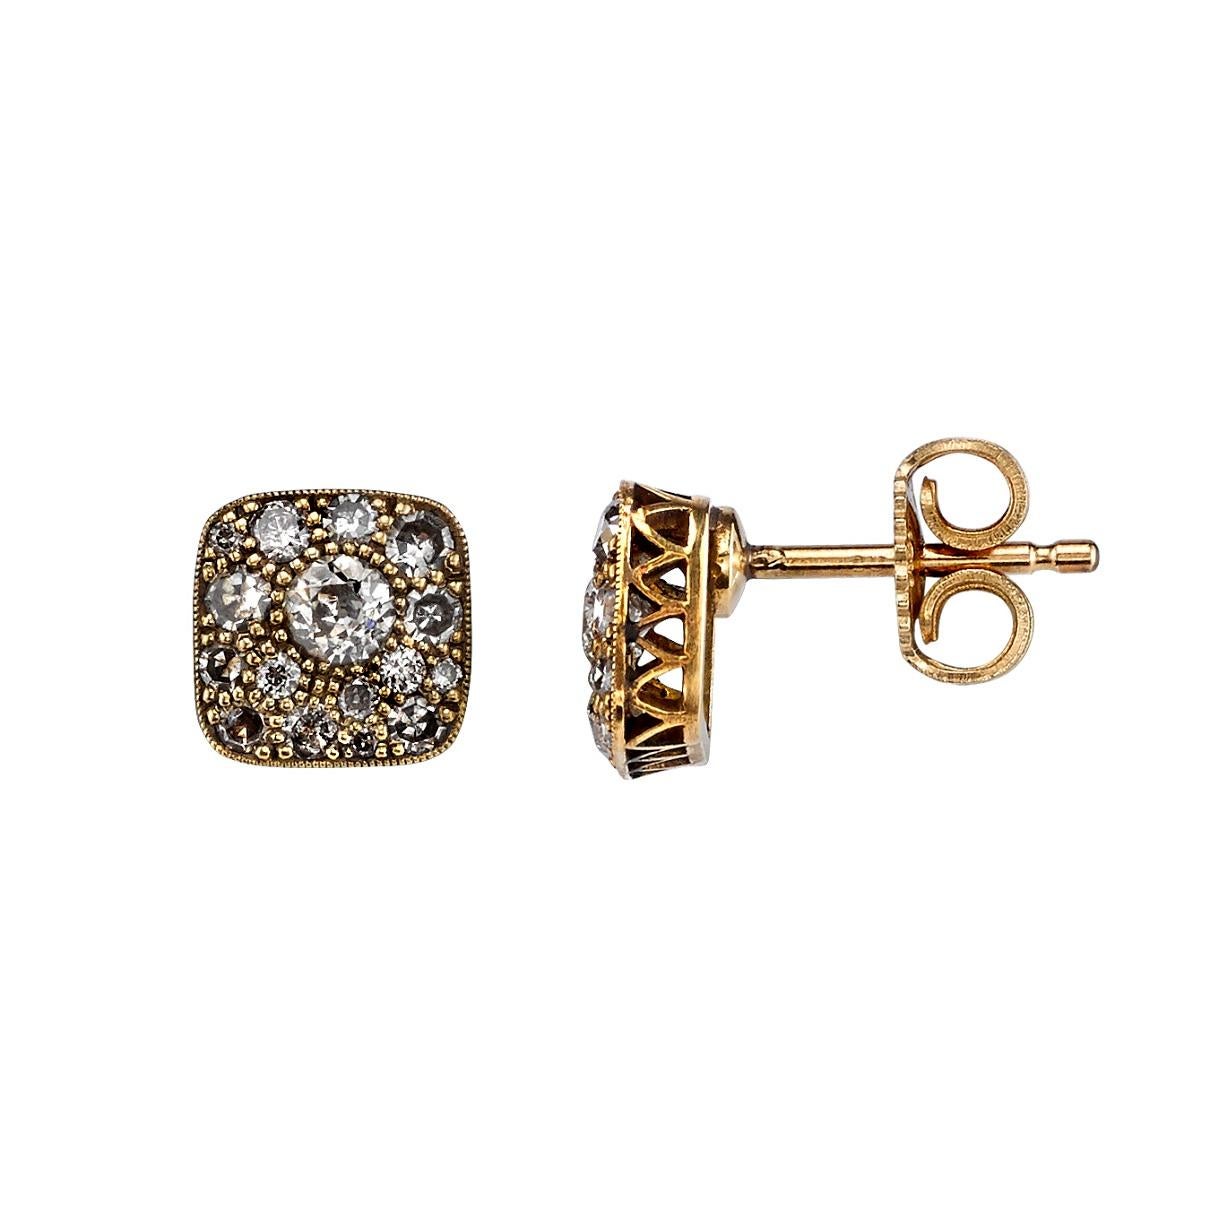 Approximately 0.60ctw varying old cut and round brilliant cut diamonds in handcrafted 18K yellow gold stud earrings. Available in a polished or oxidized finish, please specify when ordering. 

Prices vary according to diamond weight.

*Cobblestone